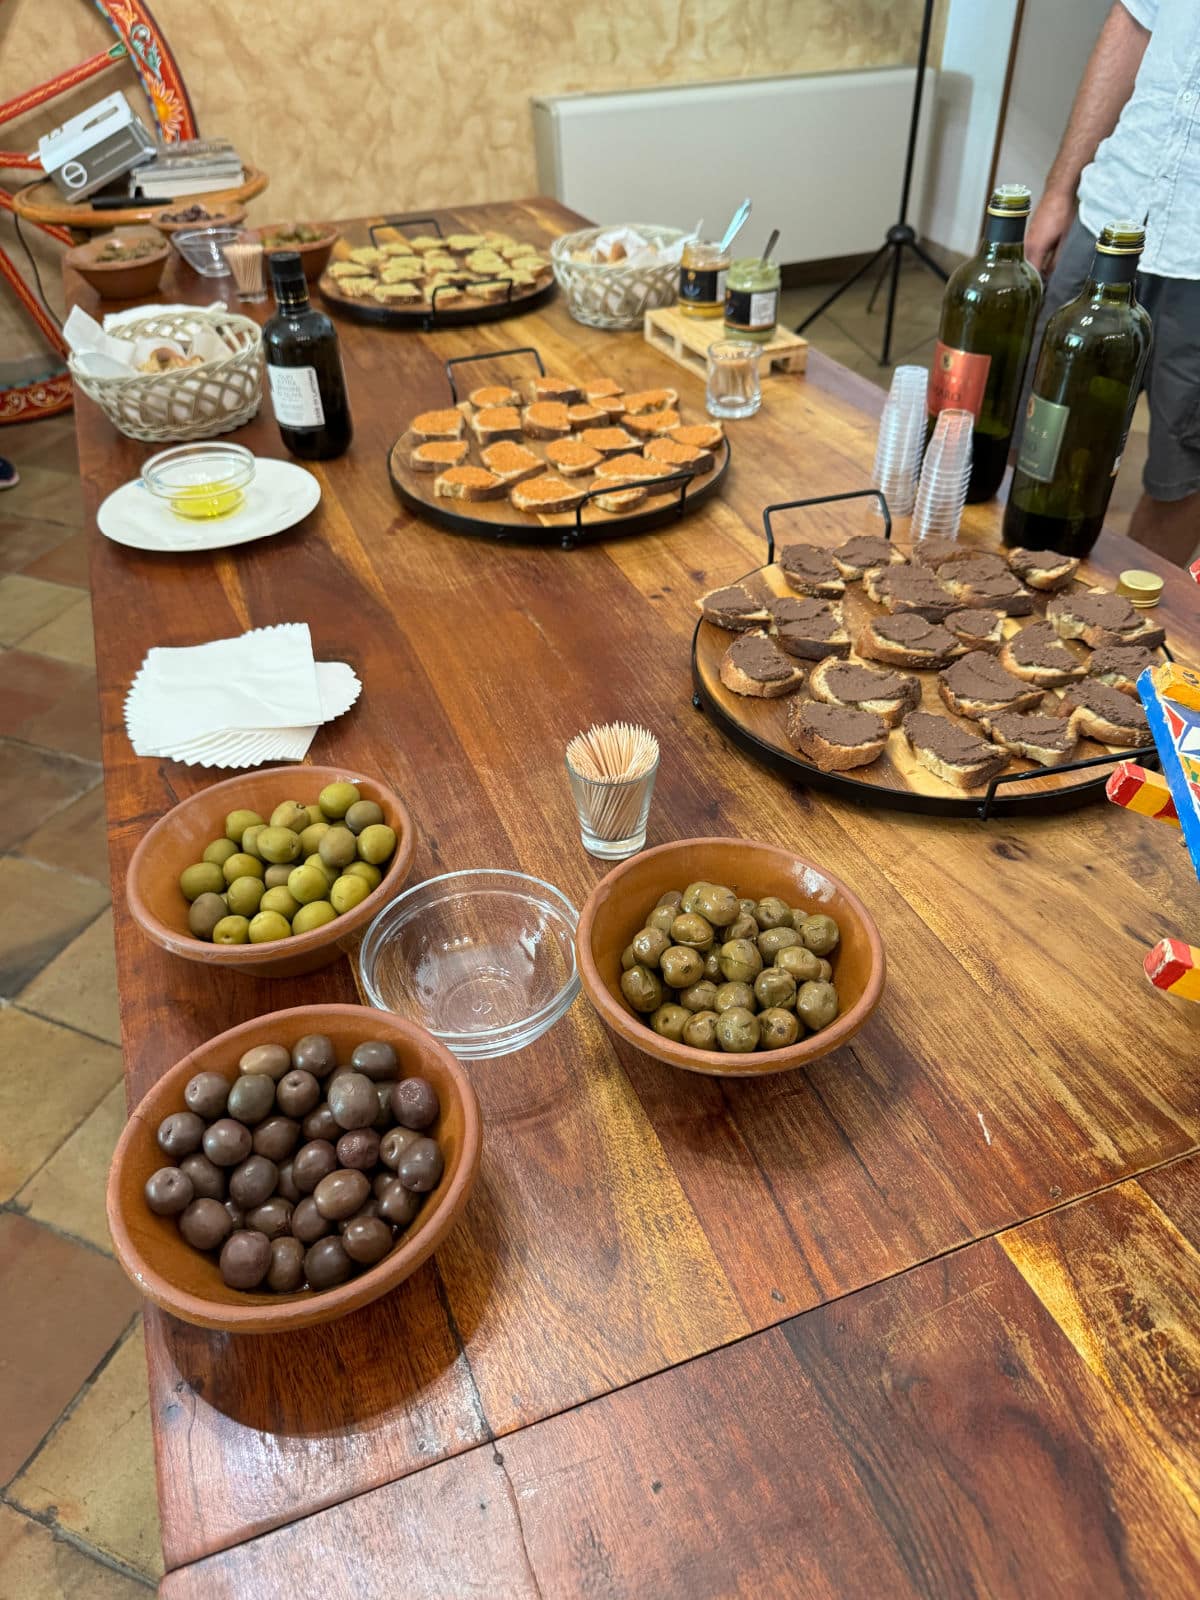 Olives and bruschetta on table.